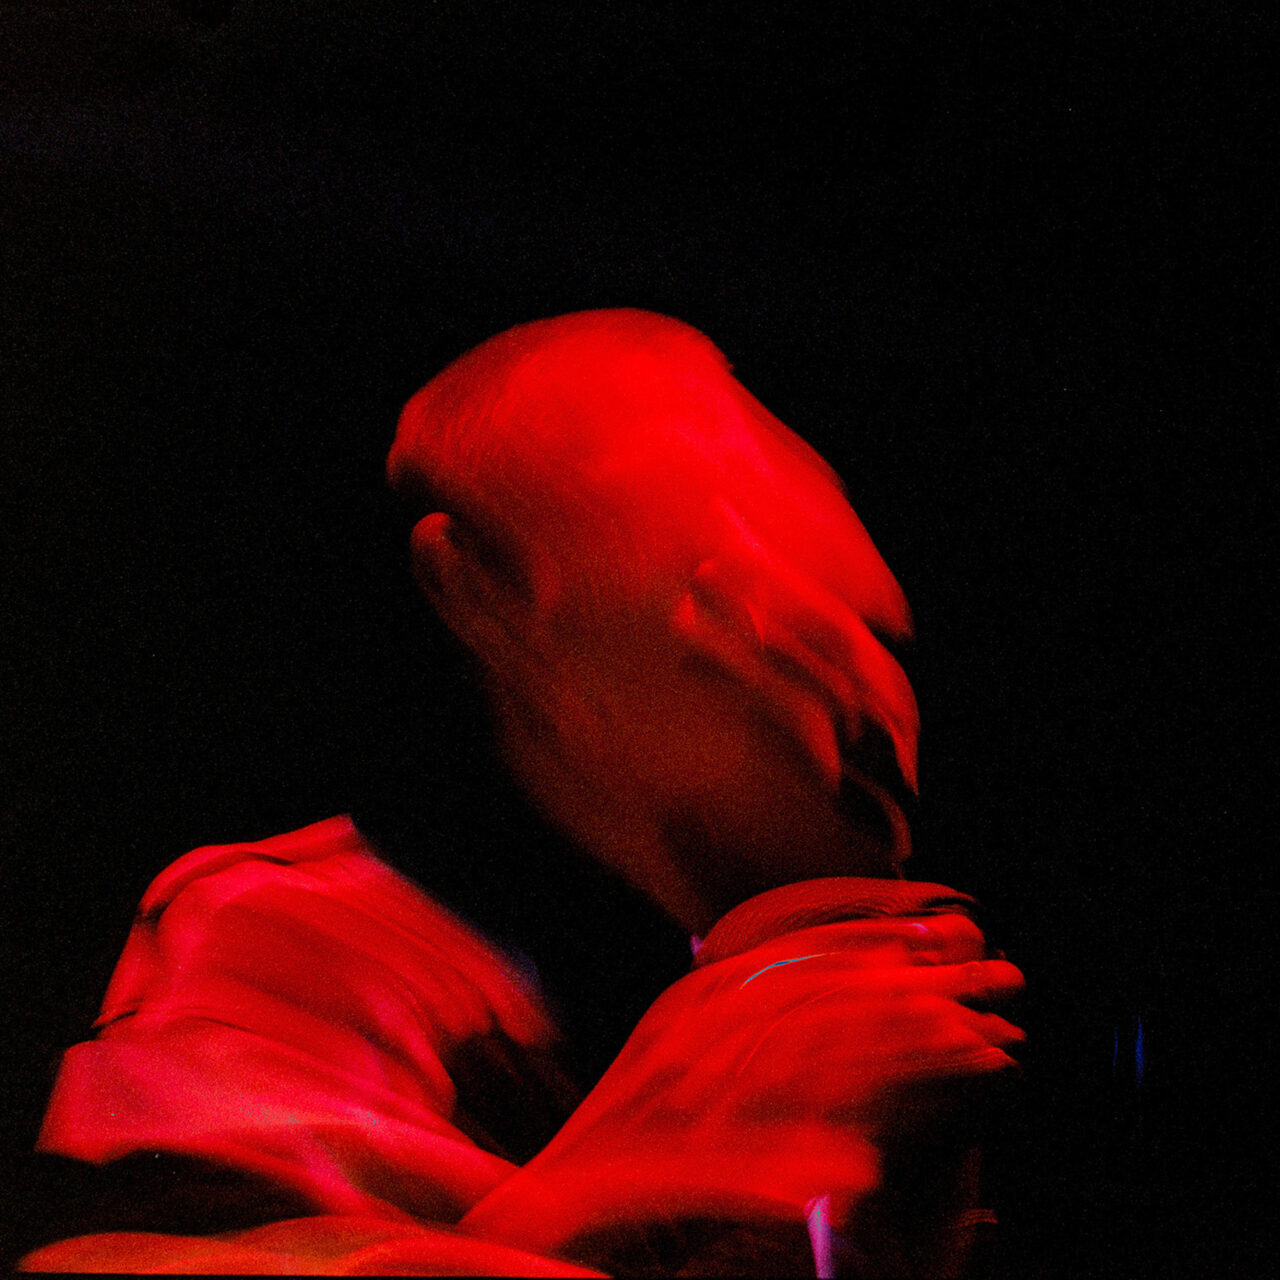 A red blurry image of Gustaf Rasch